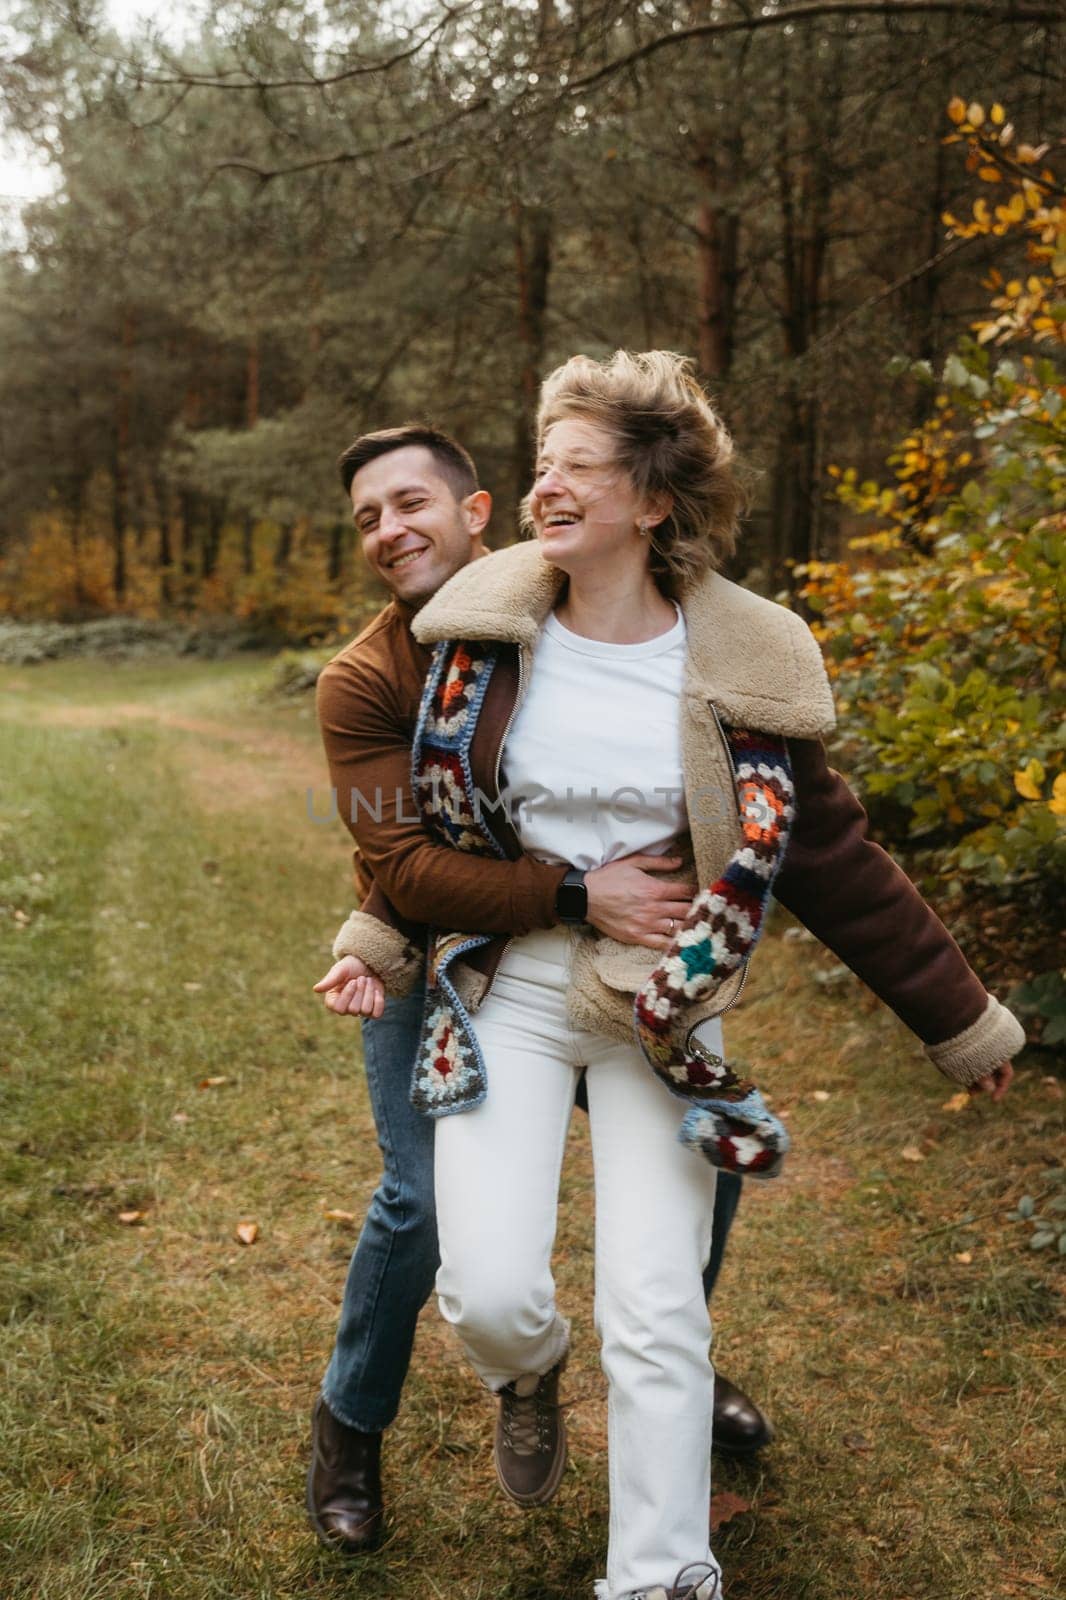 Happy couple is having fun in the middle of the forest, smiling man hugging his girlfriend in an autumn park